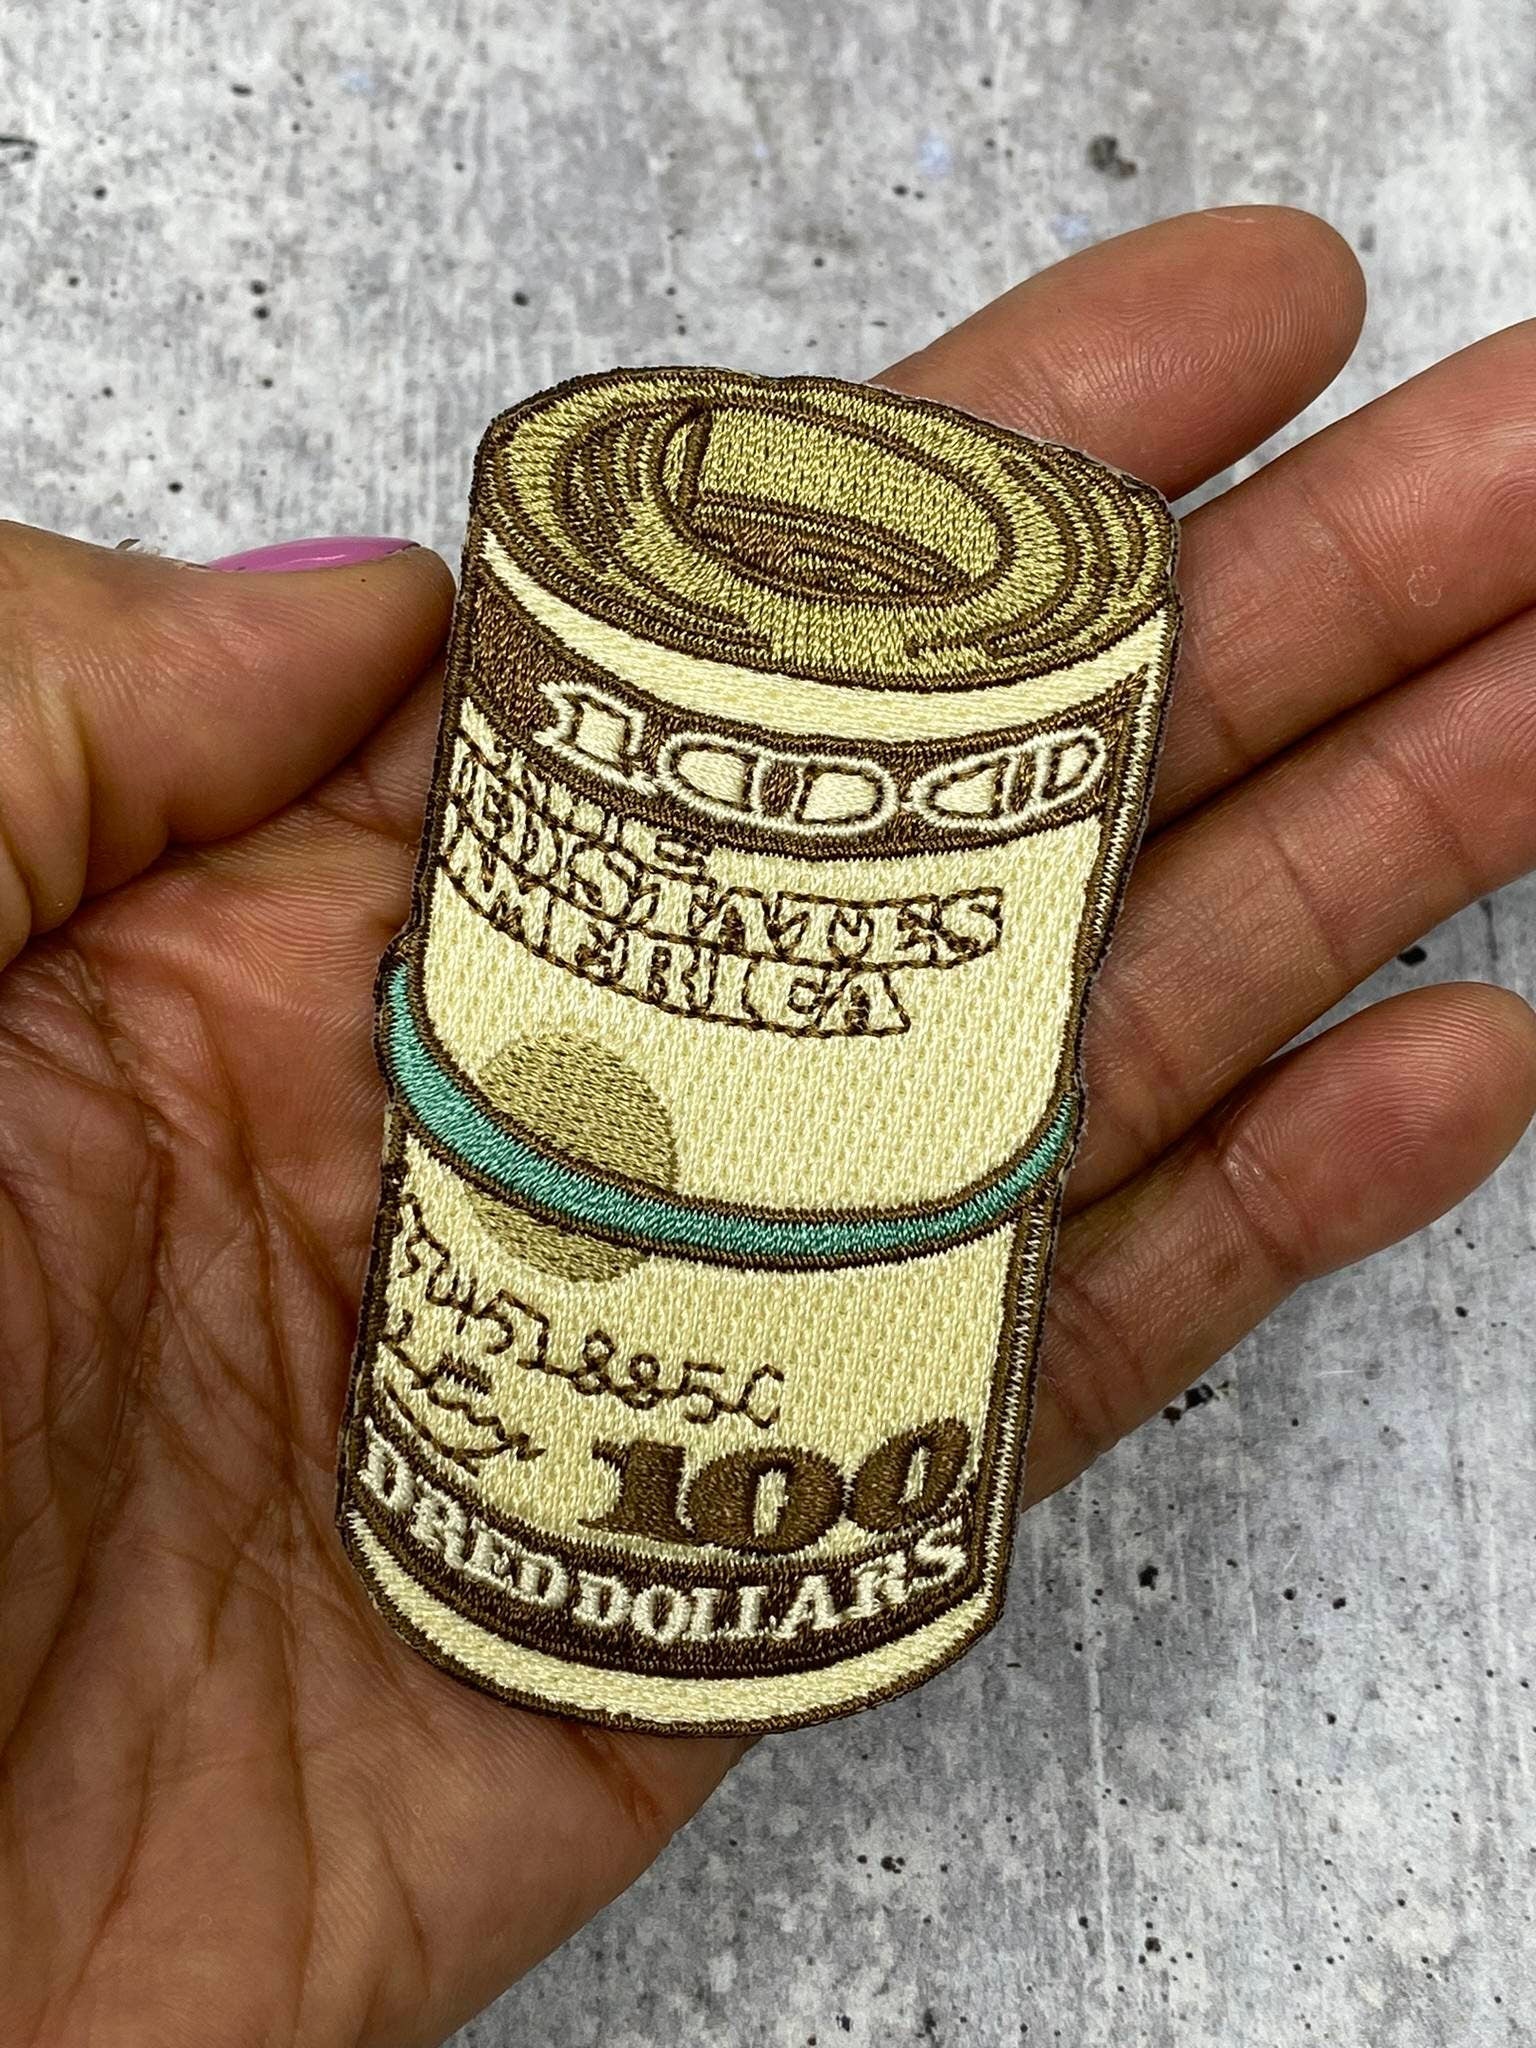 Exclusive, 1-pc, "100 dollar Bill" Money Roll, Size 3.5", Iron-on 100% Embroidered Patch; Hustler Gifts, Retro Style Gifts, DIY Applique